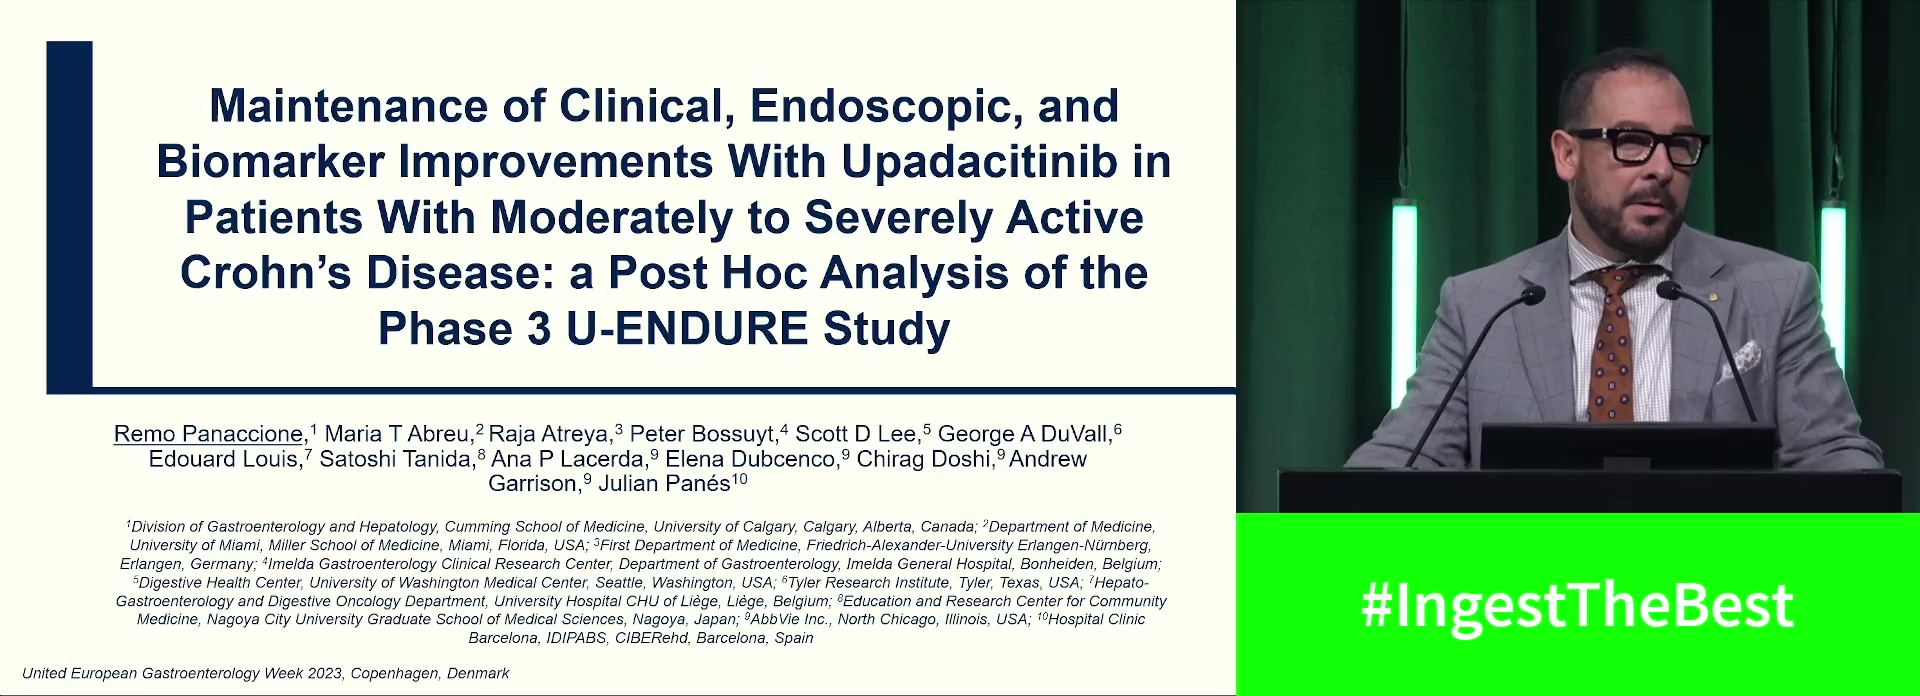 MAINTENANCE OF CLINICAL, ENDOSCOPIC, AND BIOMARKER IMPROVEMENTS WITH UPADACITINIB IN PATIENTS WITH MODERATELY TO SEVERELY ACTIVE CROHN’S DISEASE: A POST HOC ANALYSIS OF THE PHASE 3 U-ENDURE STUDY